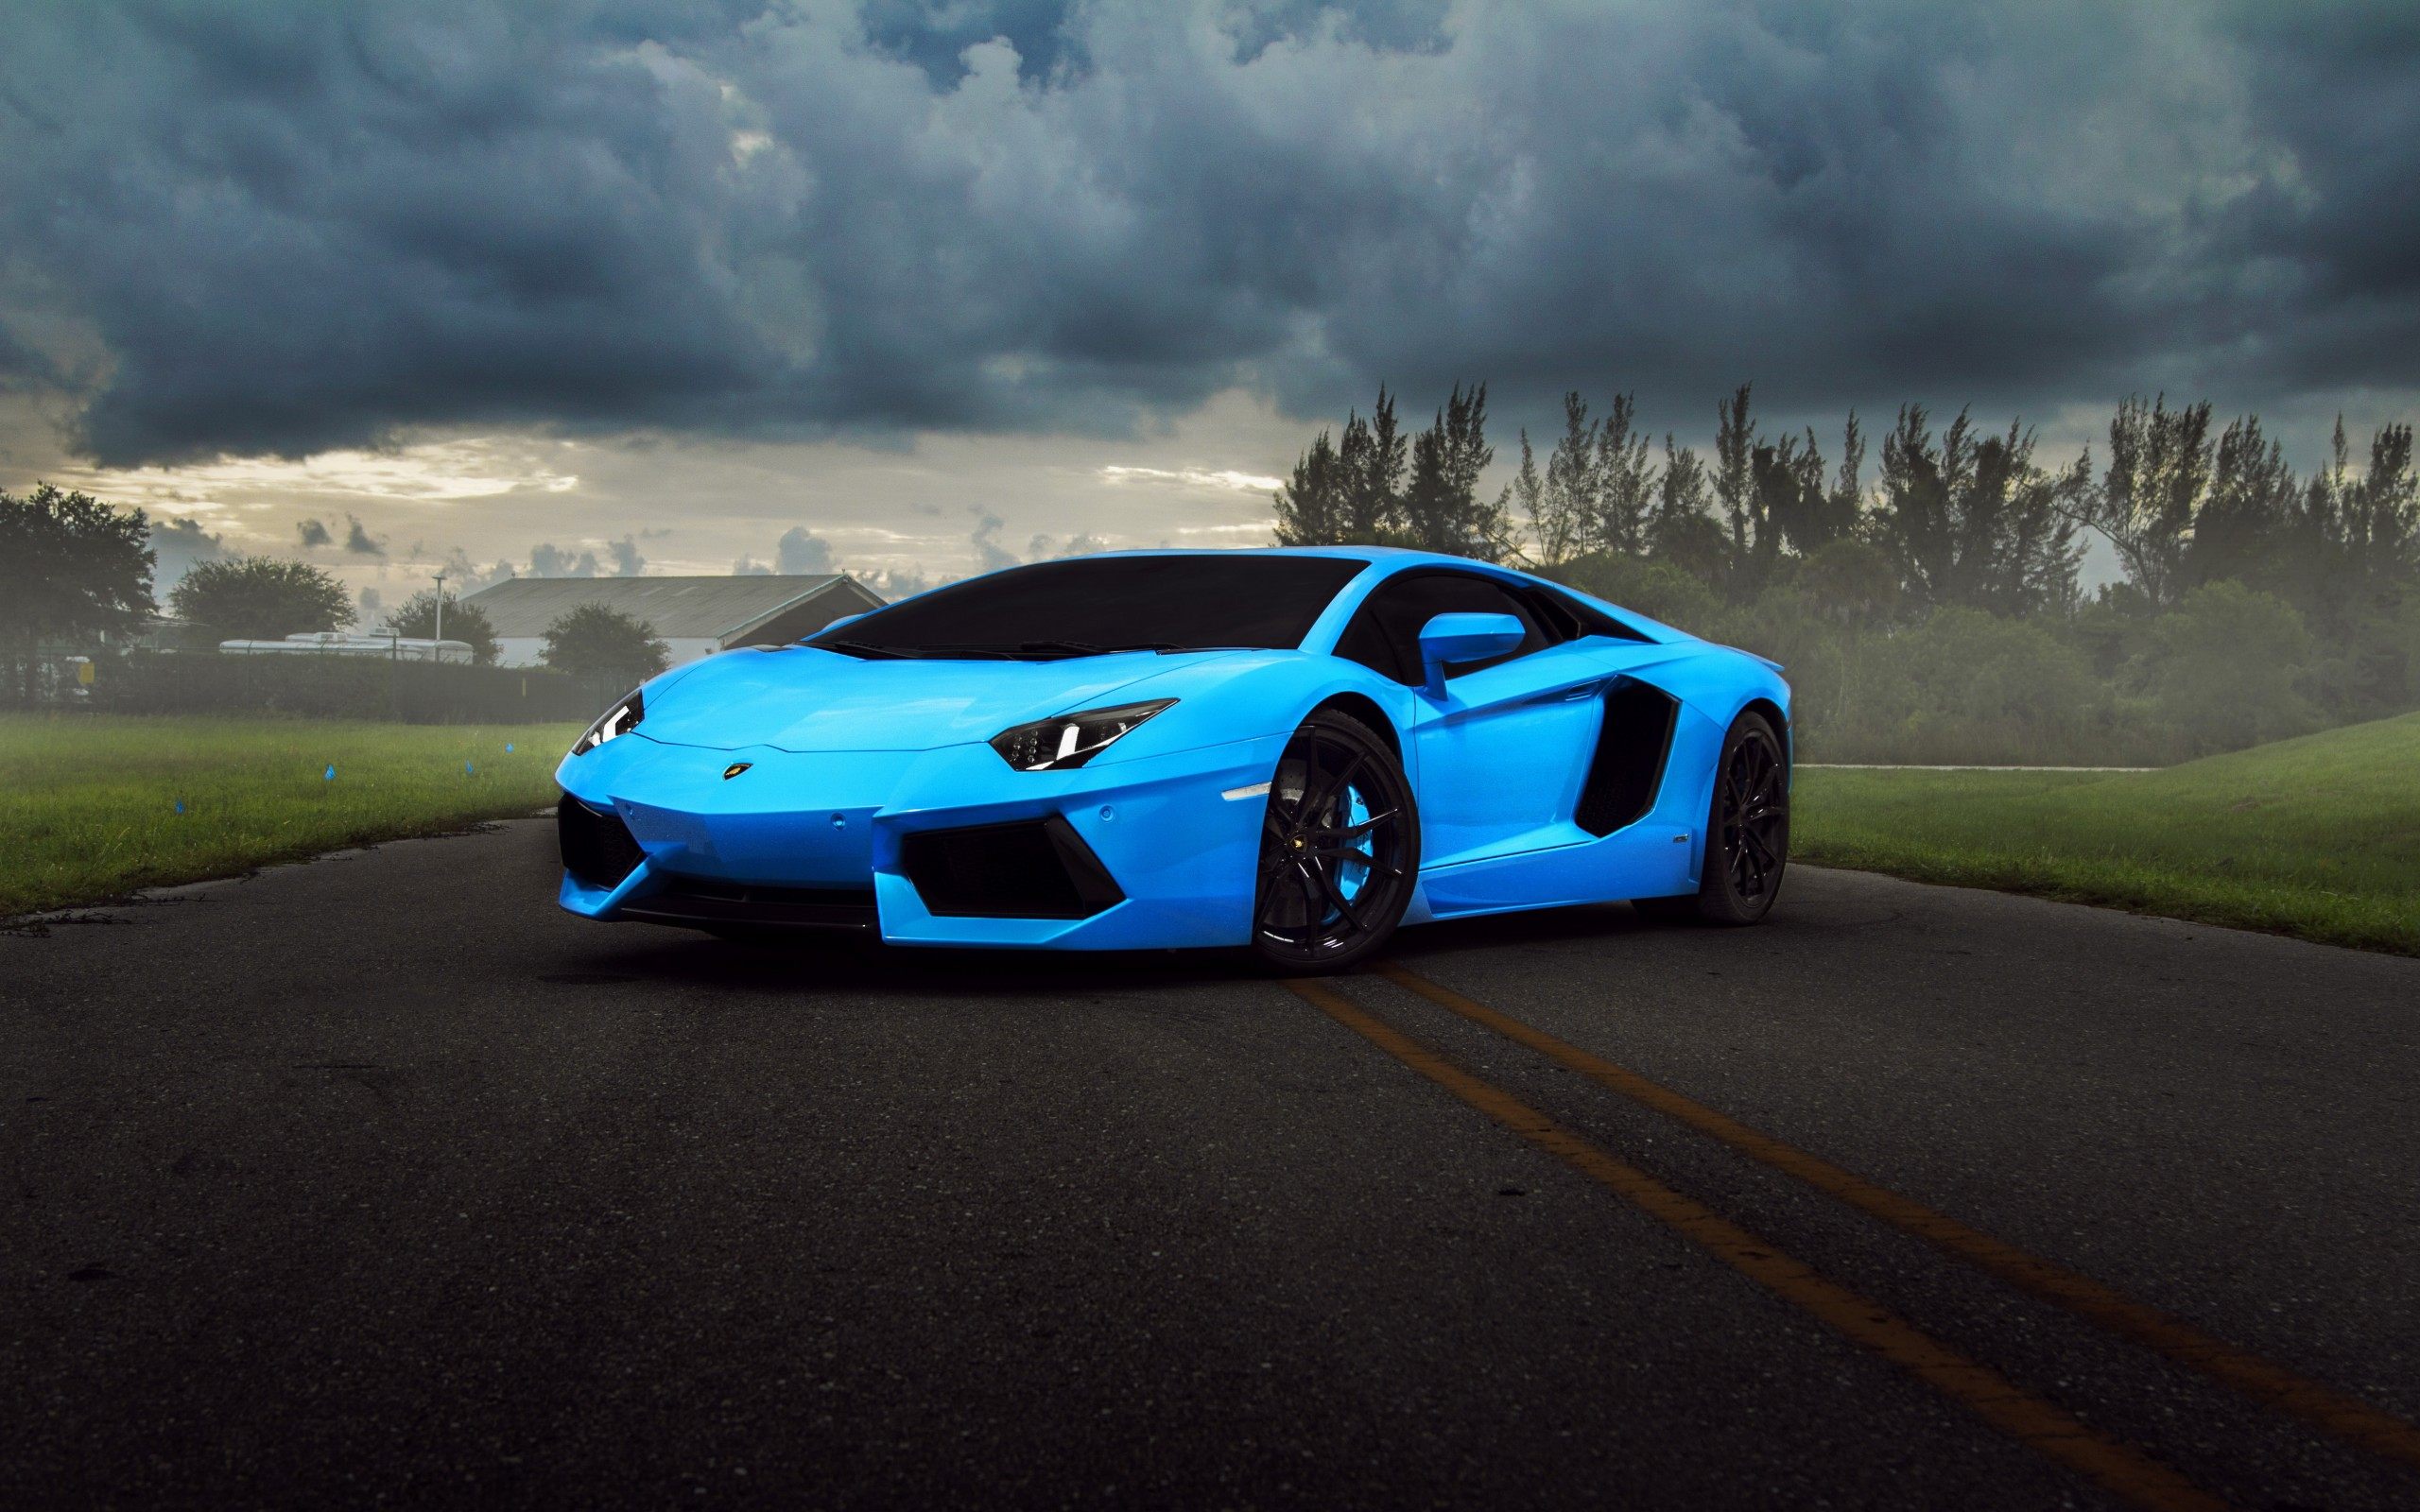 Full Hd Car Background For Editing